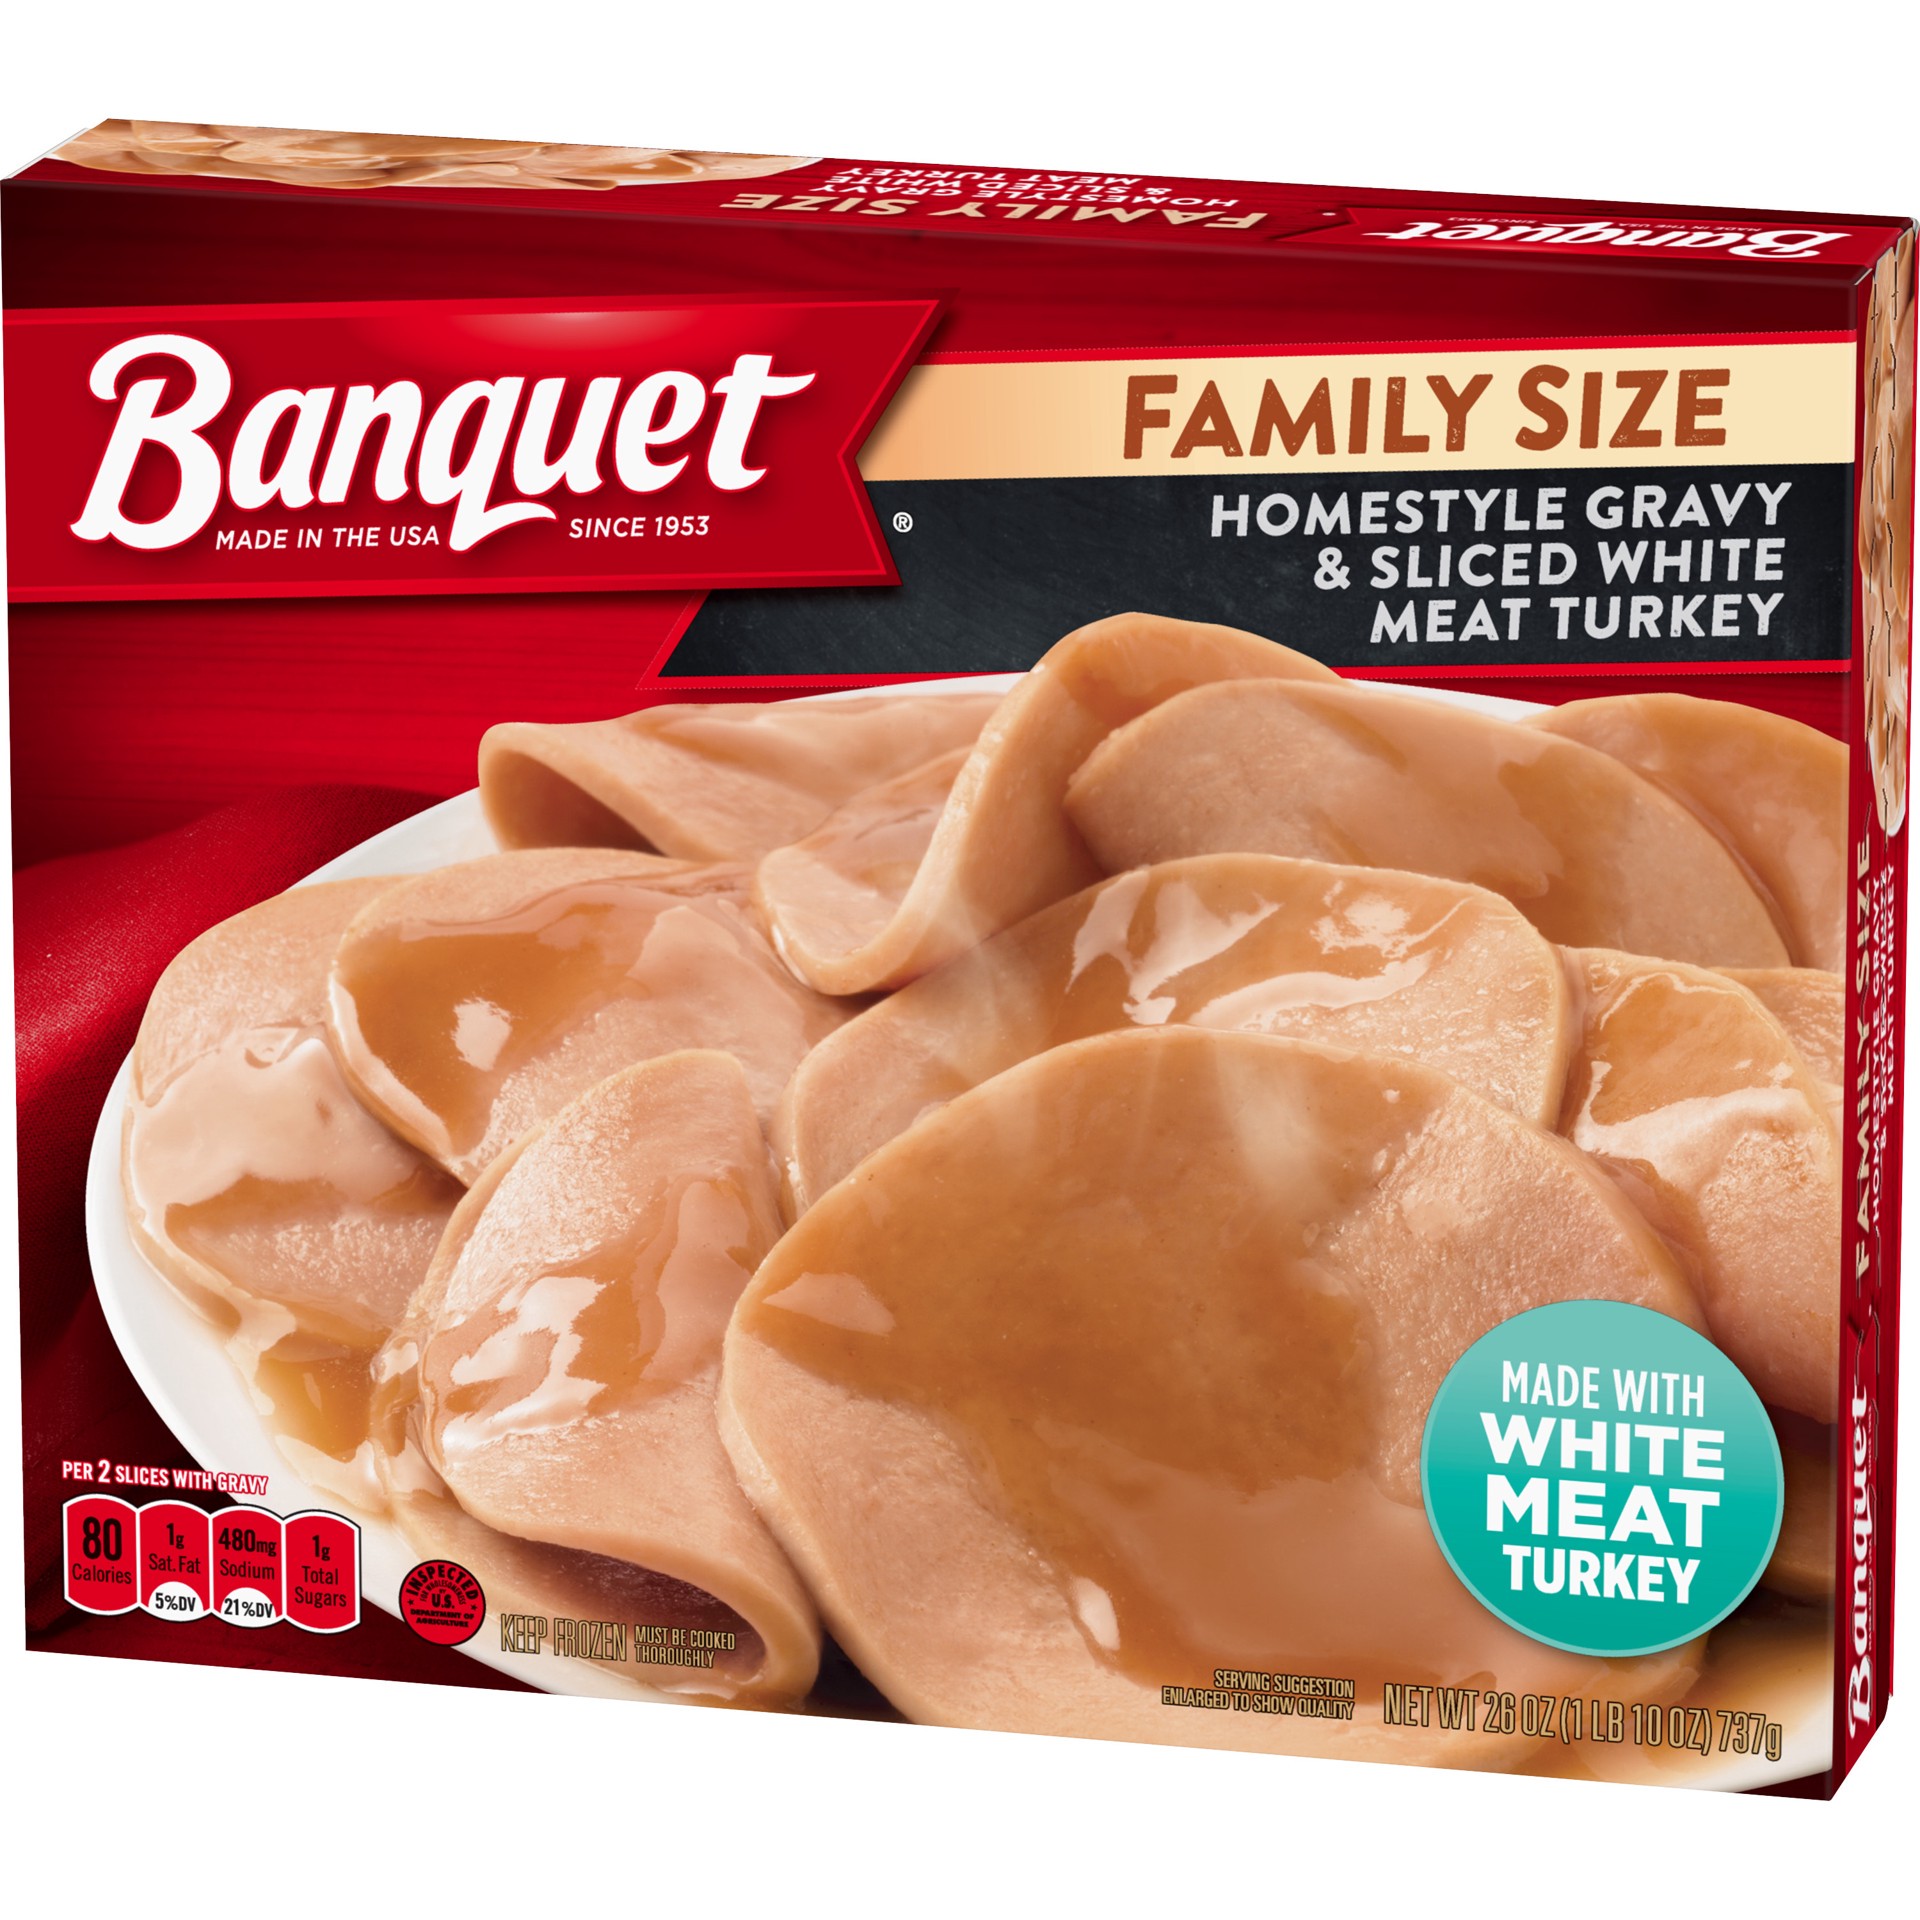 slide 5 of 5, Banquet Family Size Homestyle Gravy and Sliced White Meat Turkey, Frozen Meal, 26 OZ, 26 oz